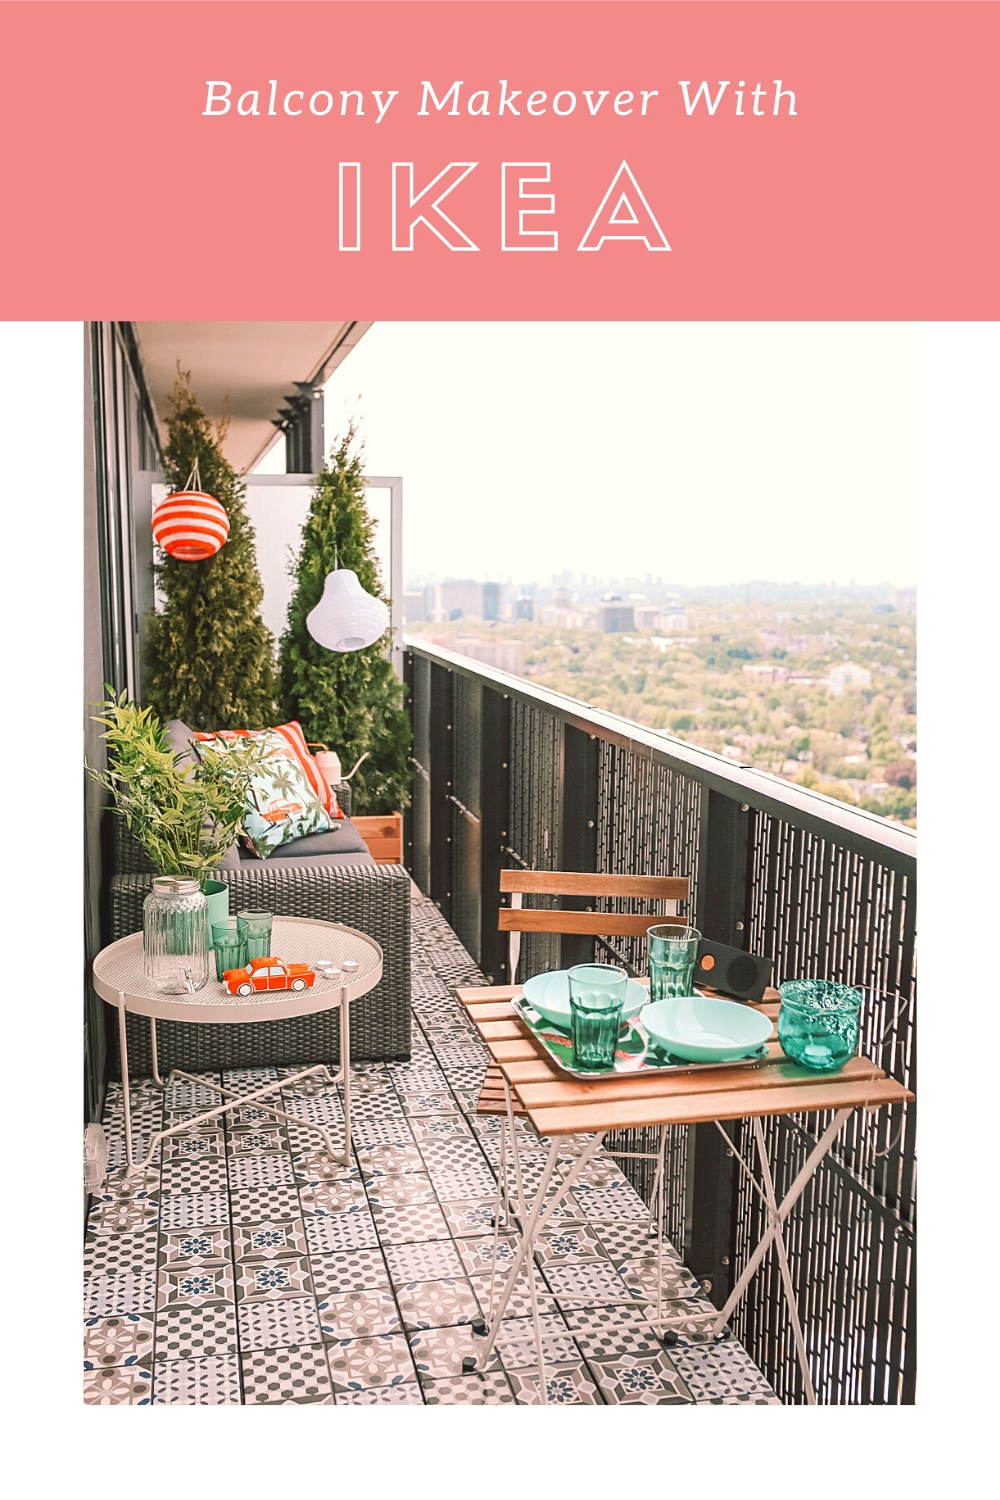 IKEA Patio Furniture Review & Makeover: check out how I gave my condo balcony a refresh with IKEA. I'm also sharing in-depth reviews of the IKEA Solleron series sofa, Mallsten tile decking from IKEA and all the cutest outdoor accessories to make your space an oasis in a concrete jungle.